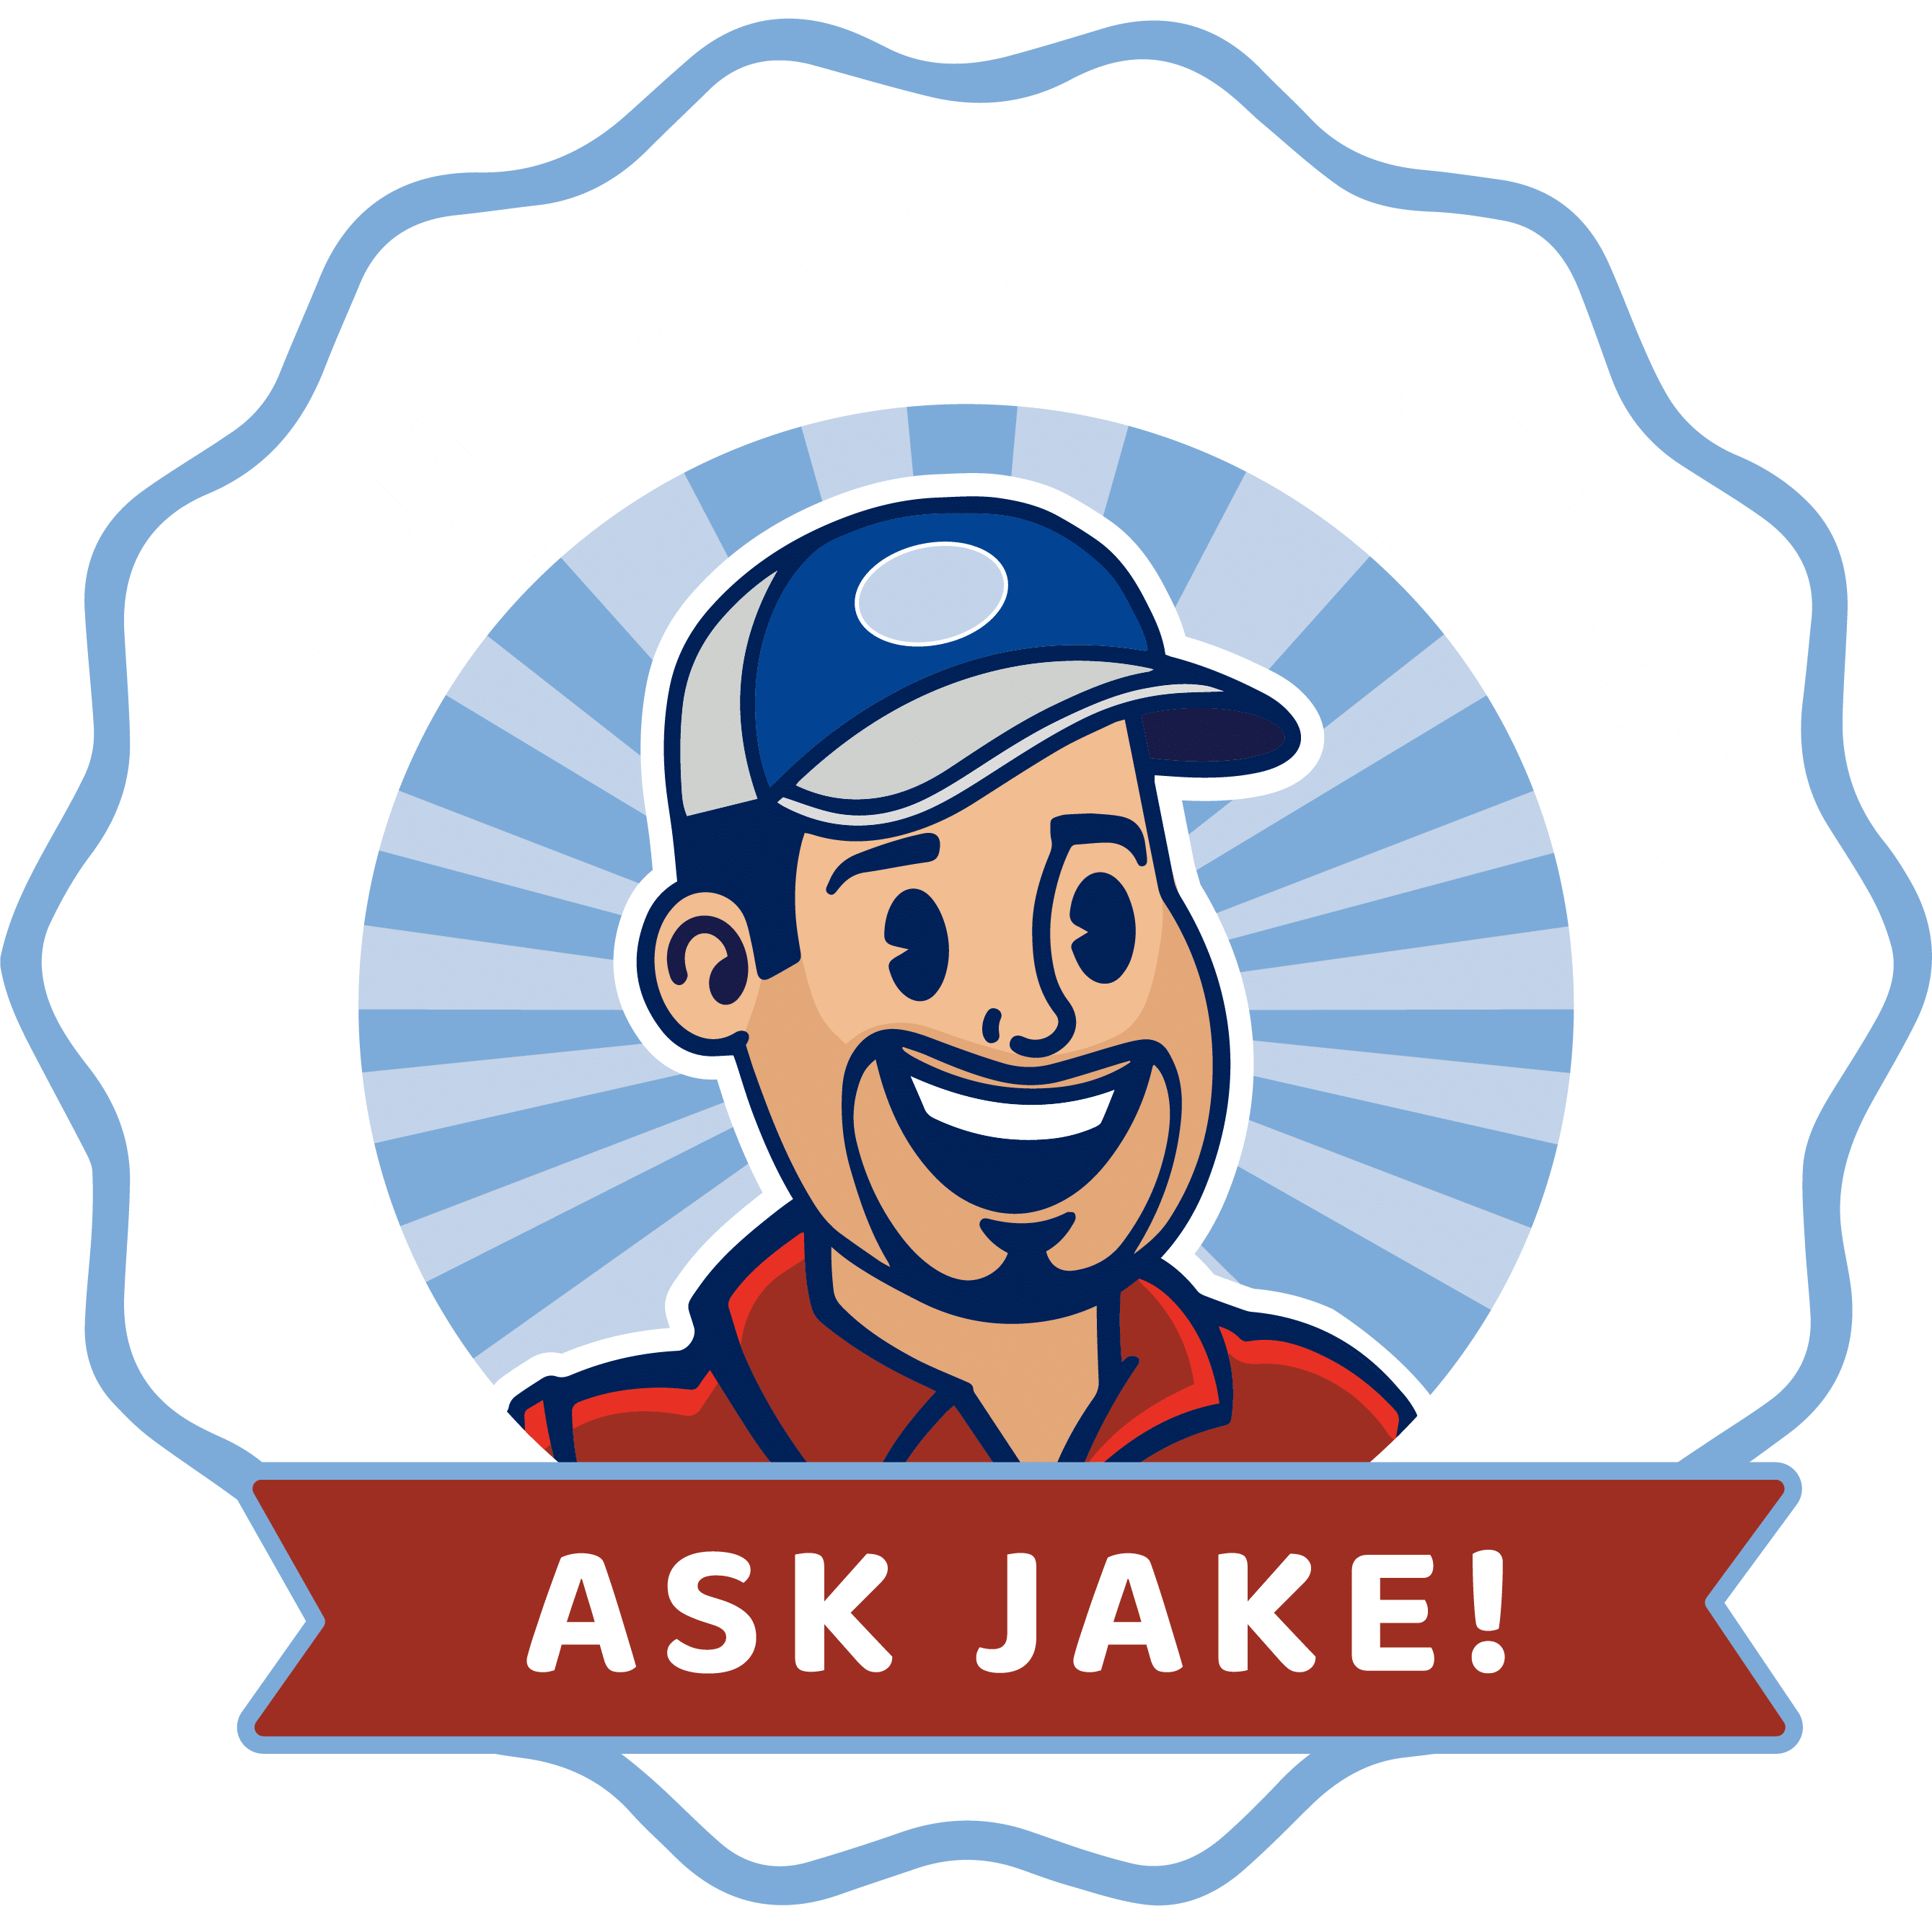 Flush away your worries and ask Jake!